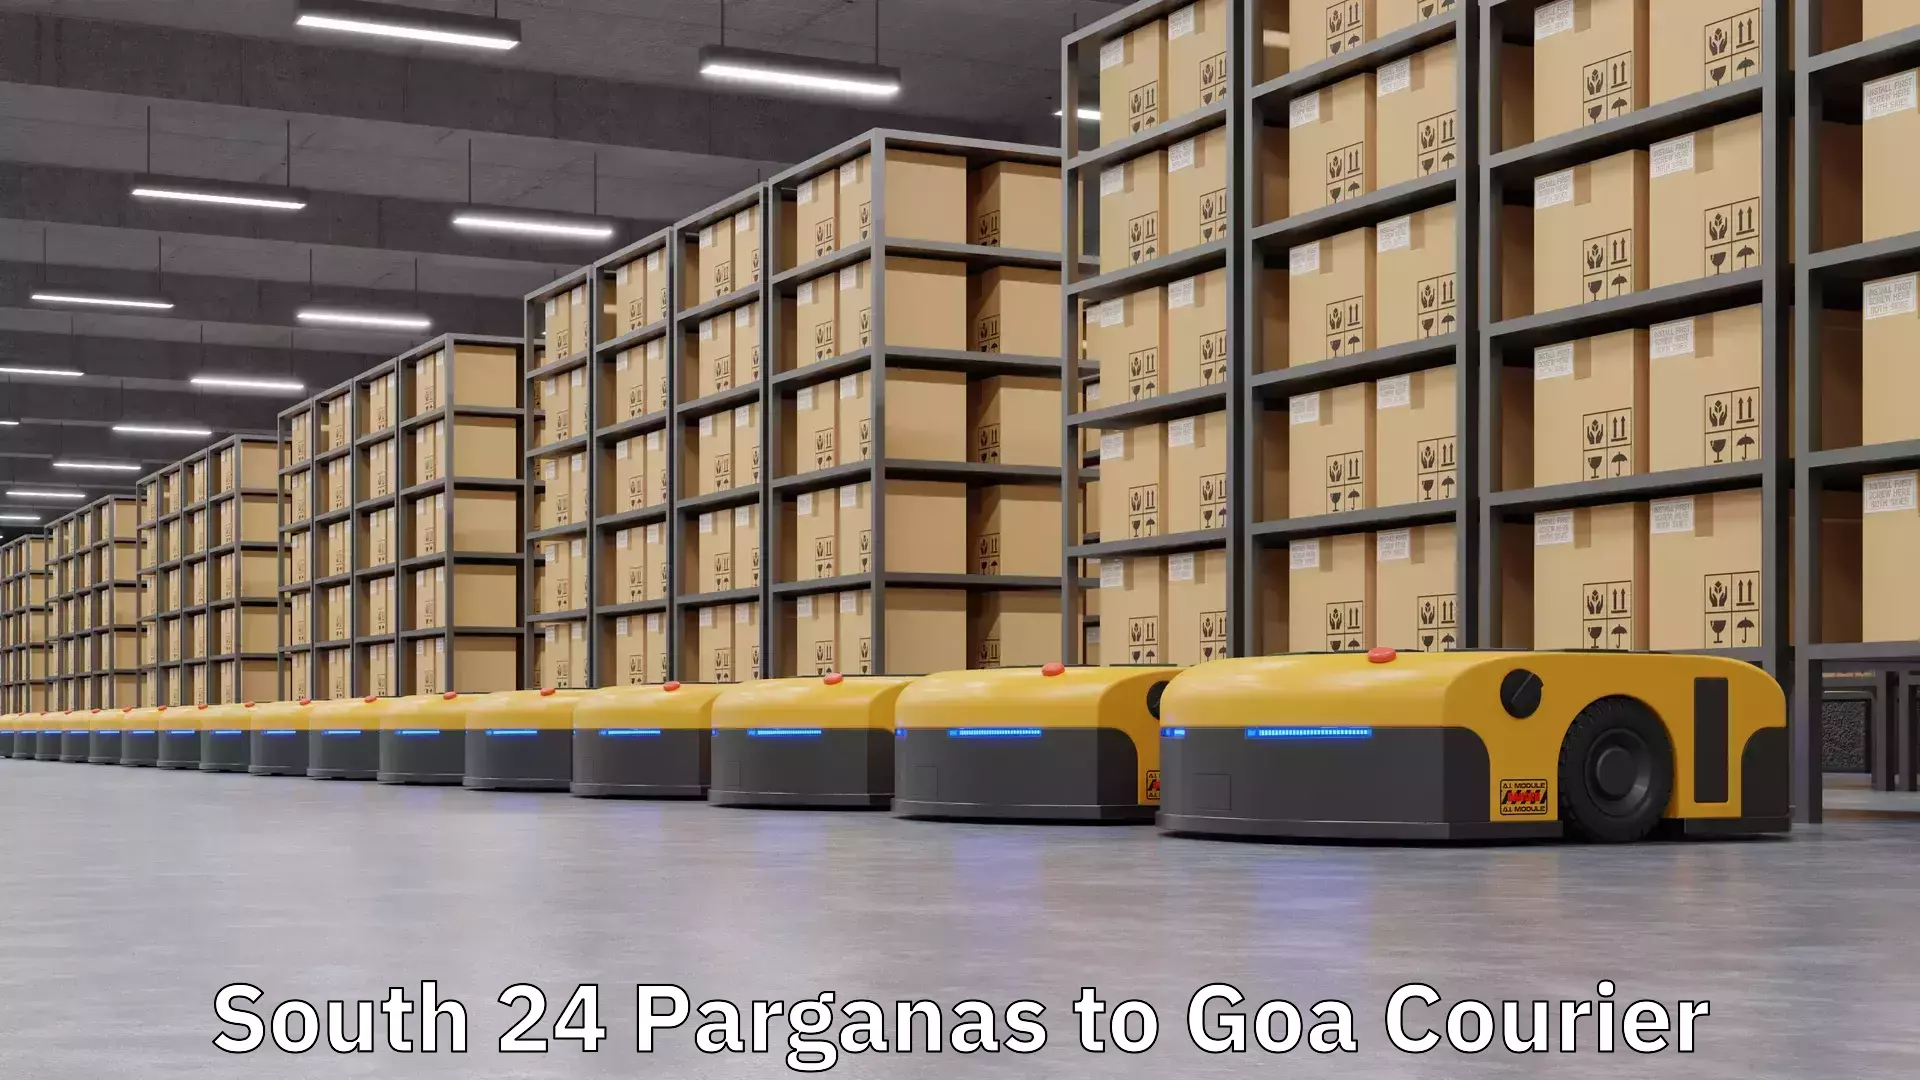 Customer-focused courier South 24 Parganas to Goa